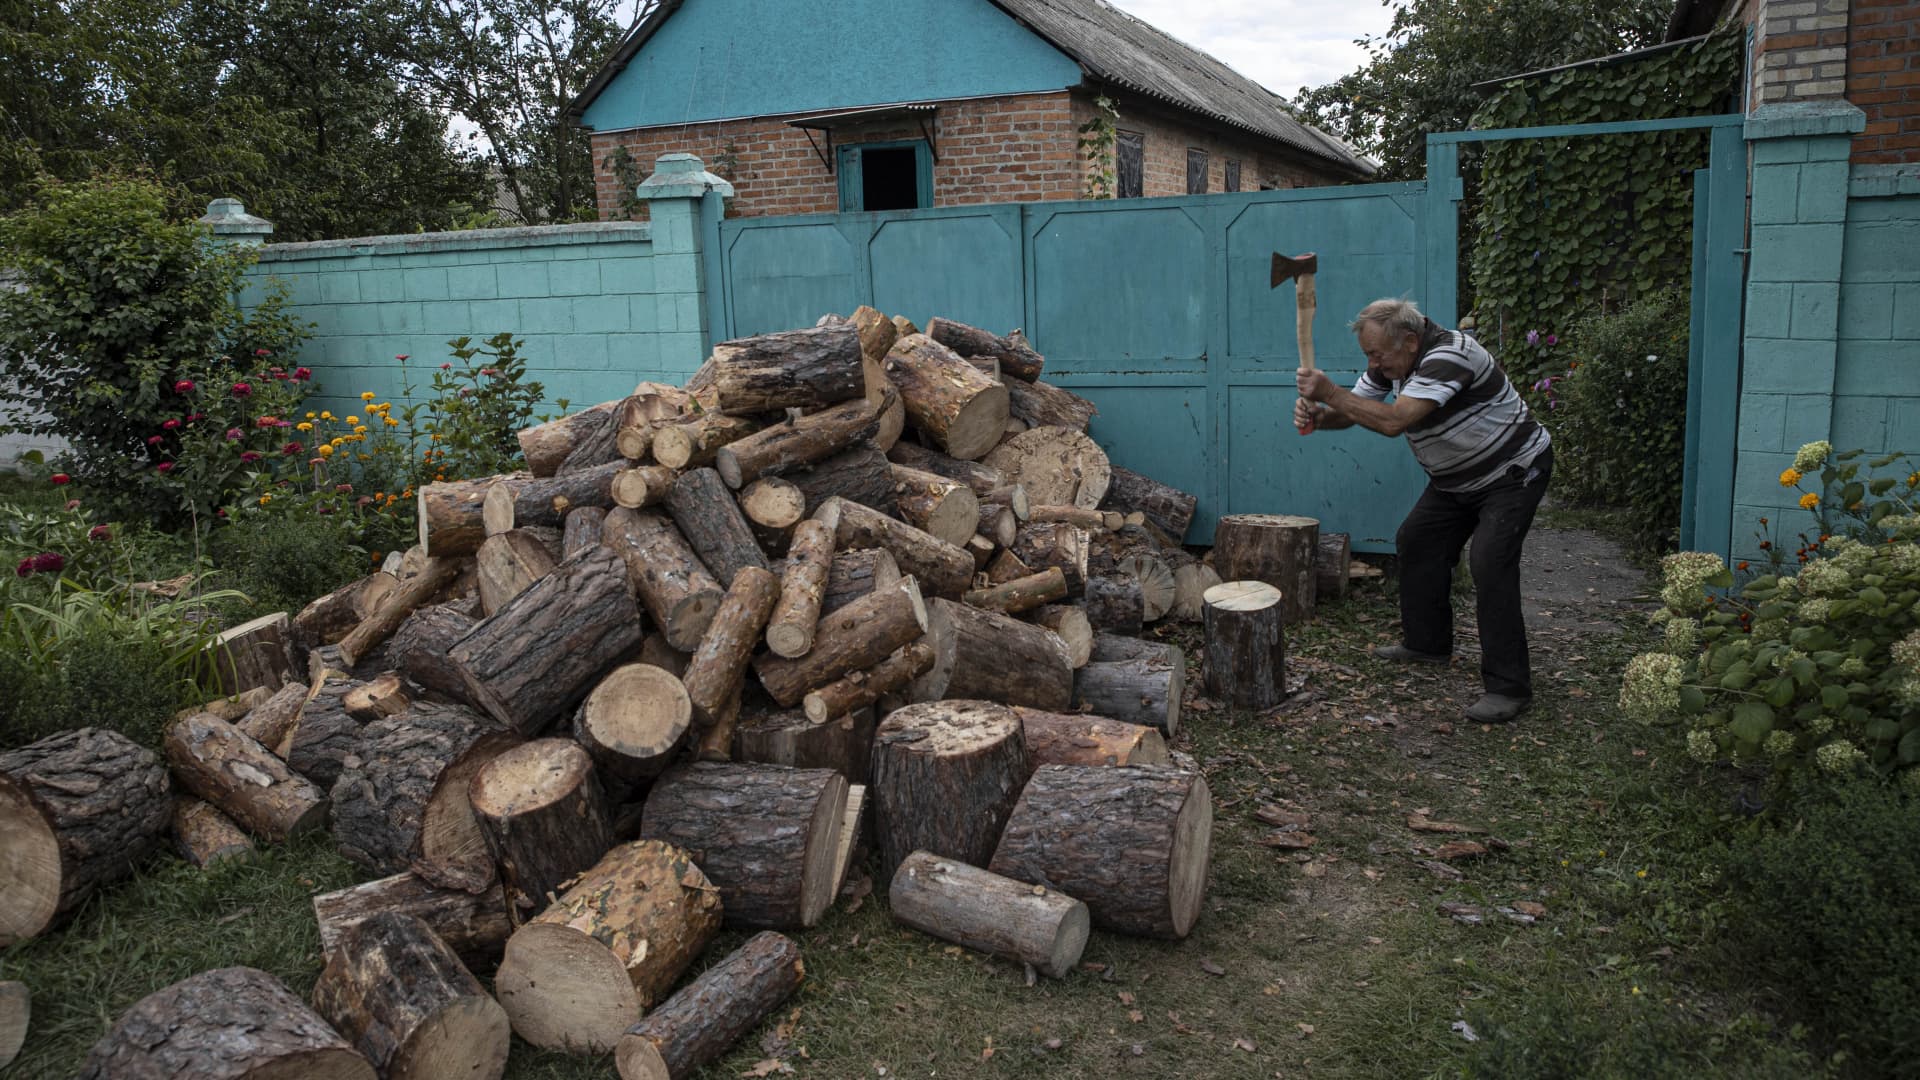 A Ukrainian man prepares for the cold winter and stocking up on firewood in Kharkiv, Ukraine, September 13, 2022.